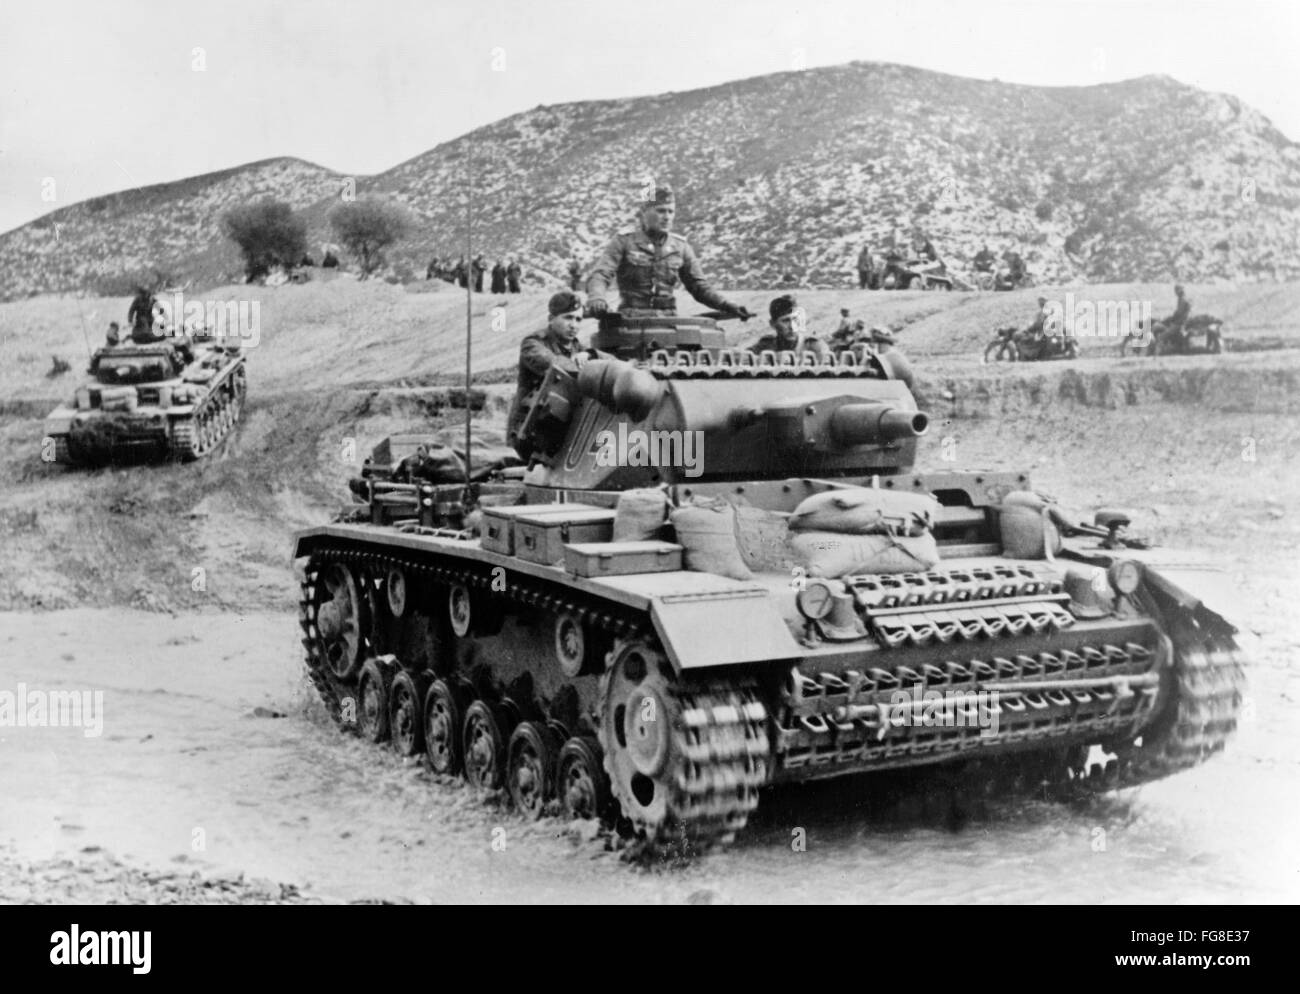 Ww2 armoured vehicles Black and White Stock Photos & Images - Alamy